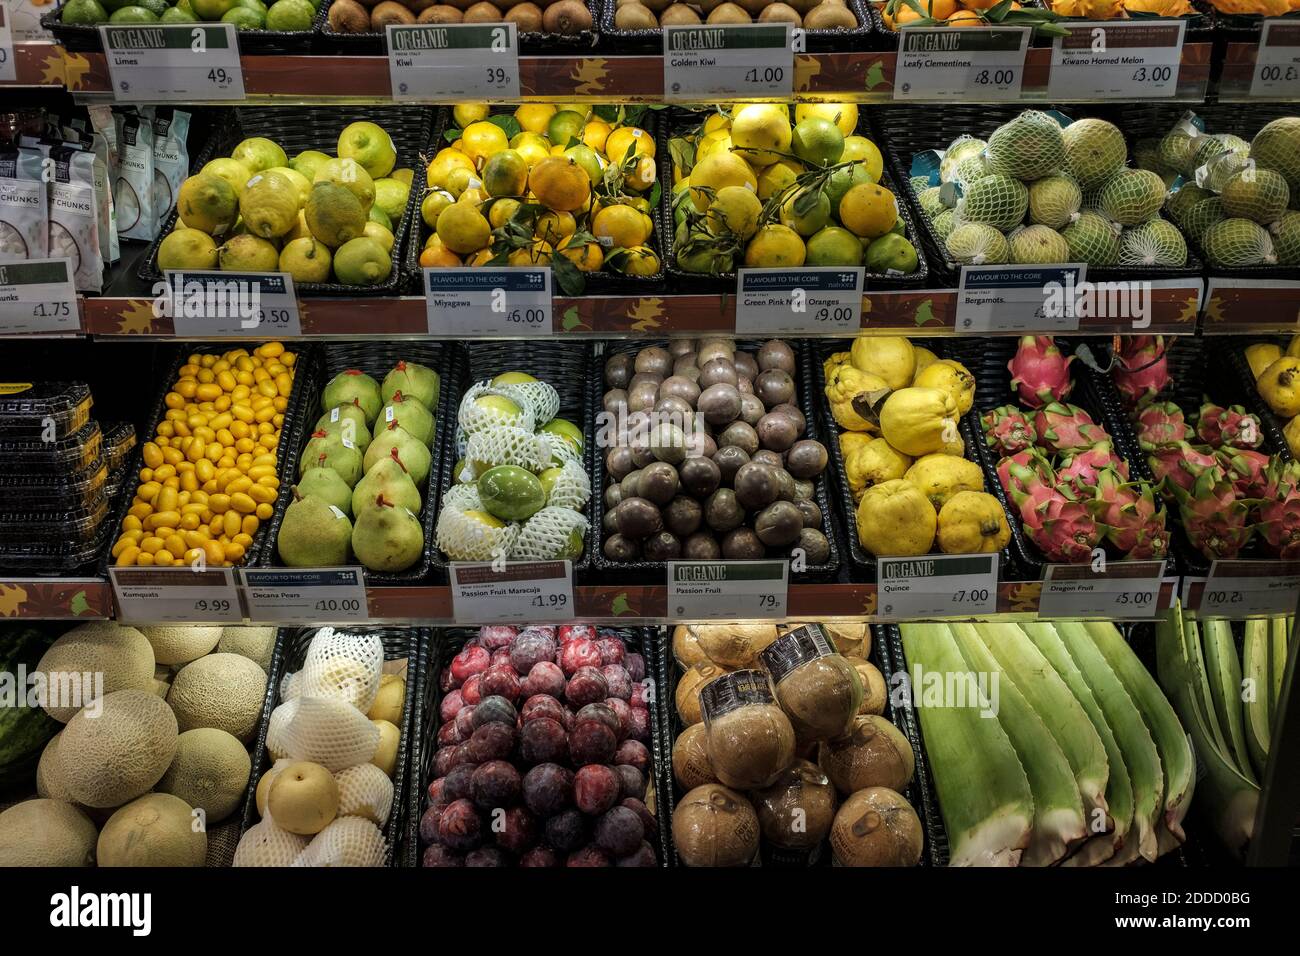 Shelves with organic fruit in vegetables, Whole foods, London,England Stock Photo